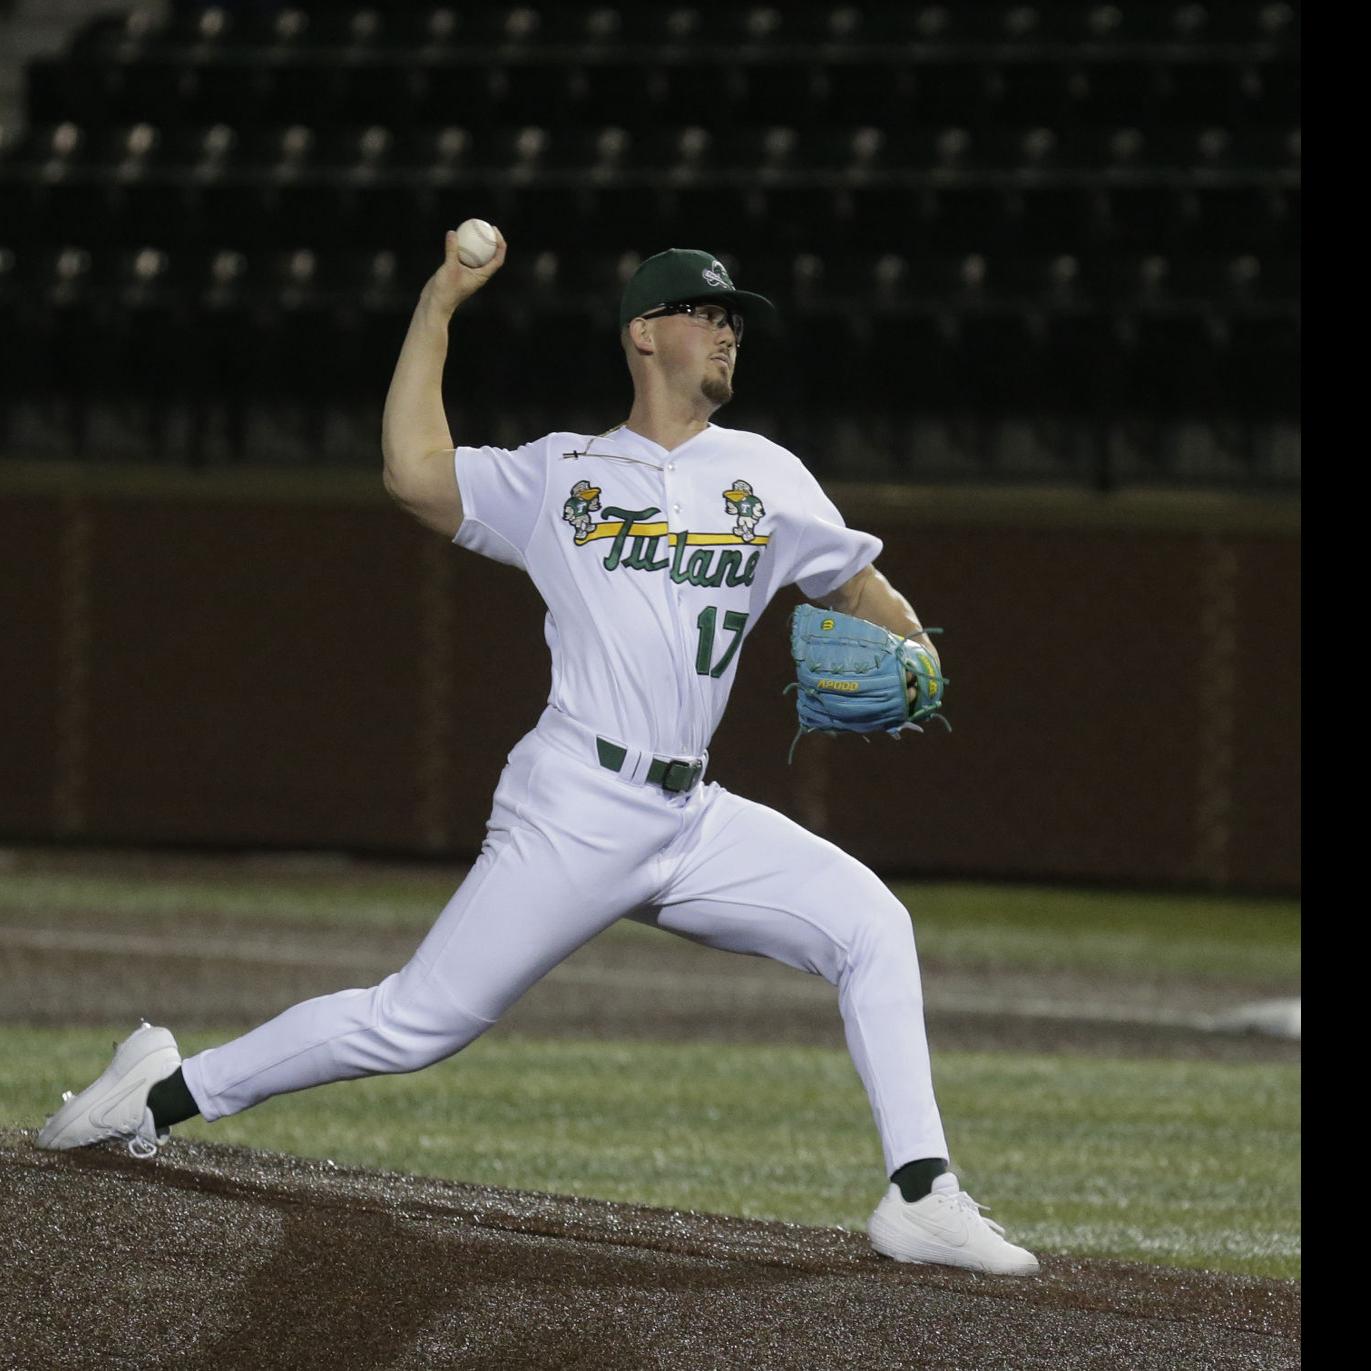 In Roper they trust: Tulane baseball expecting top notch performance from  Friday starter, Tulane